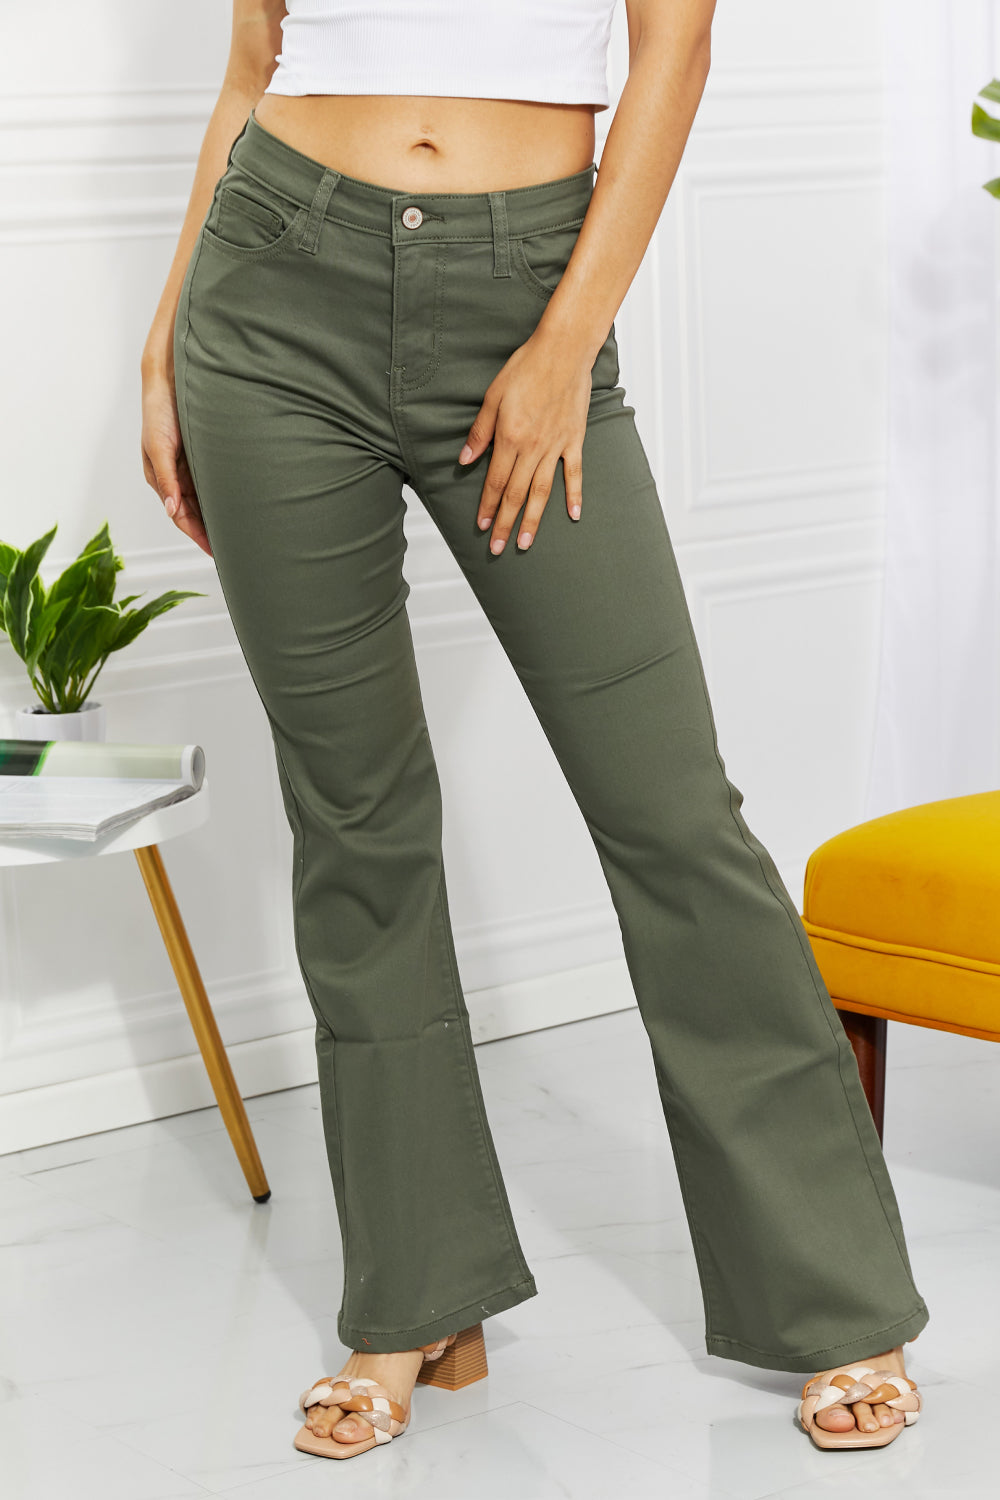 Women’s Zenana Clementine Full Size High-Rise Bootcut Jeans in Olive